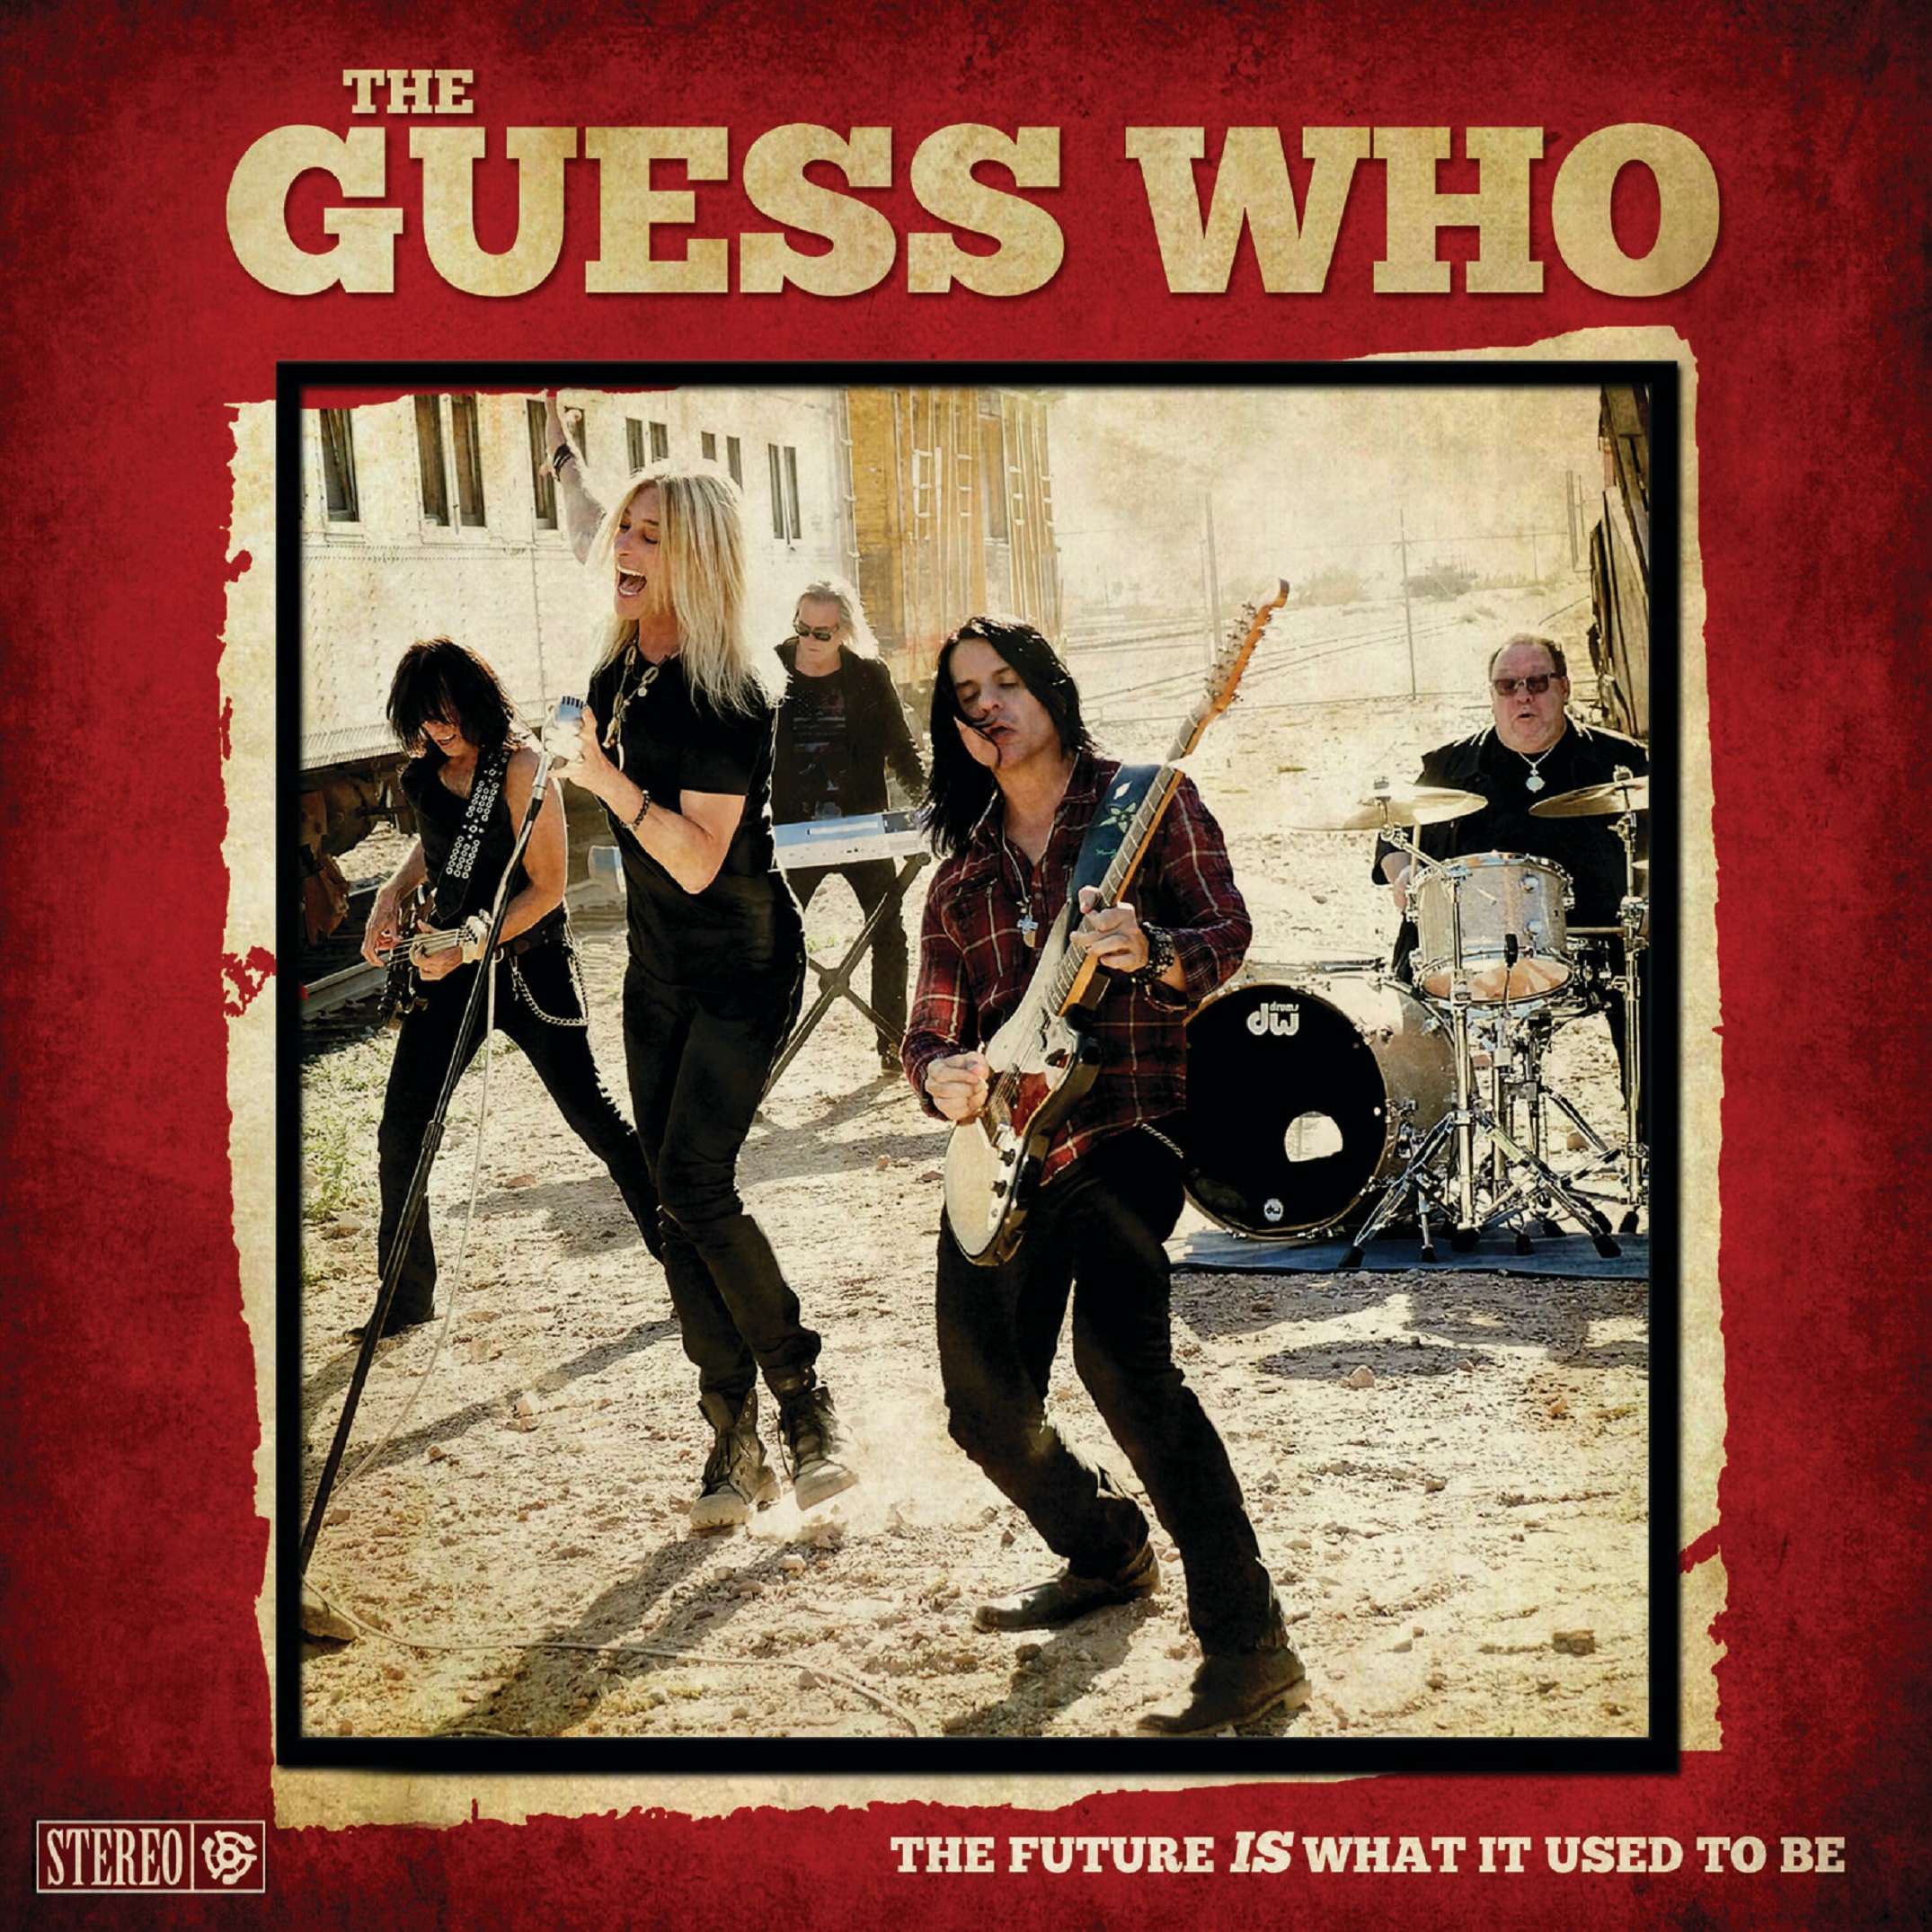 THE GUESS WHO RETURN WITH 'THE WHAT IT TO BE' | Grateful Web